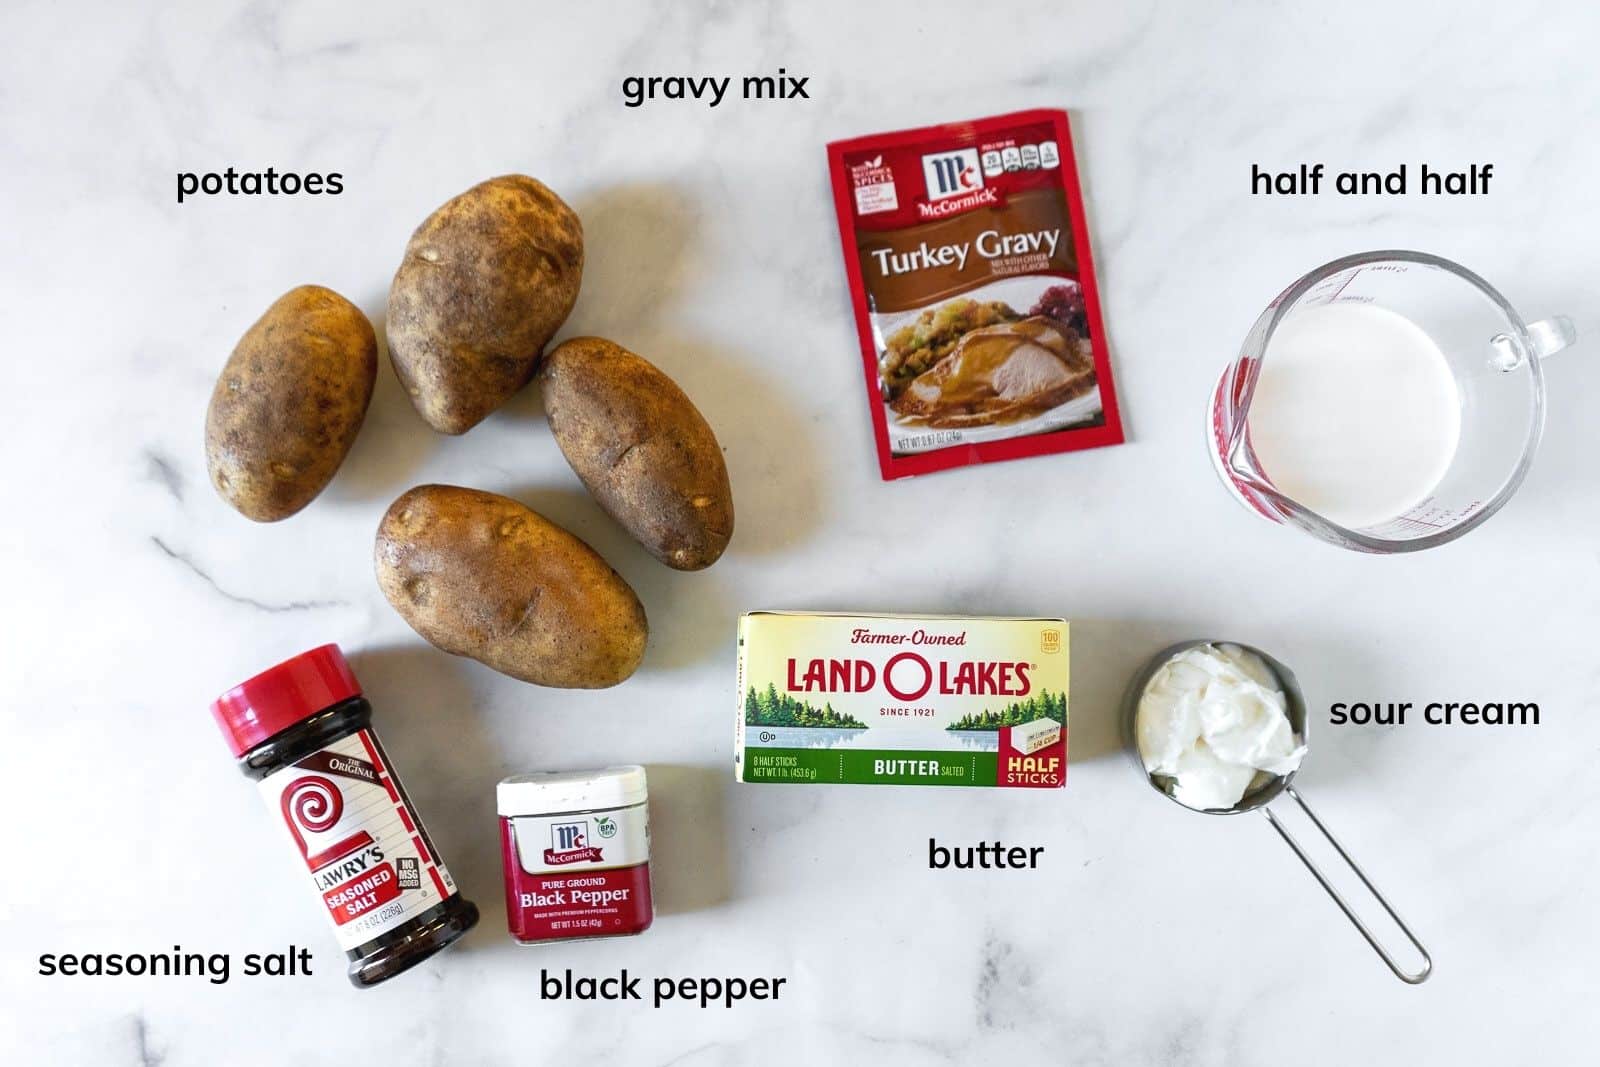 Ingredients needed to make perfect mashed potatoes and gravy